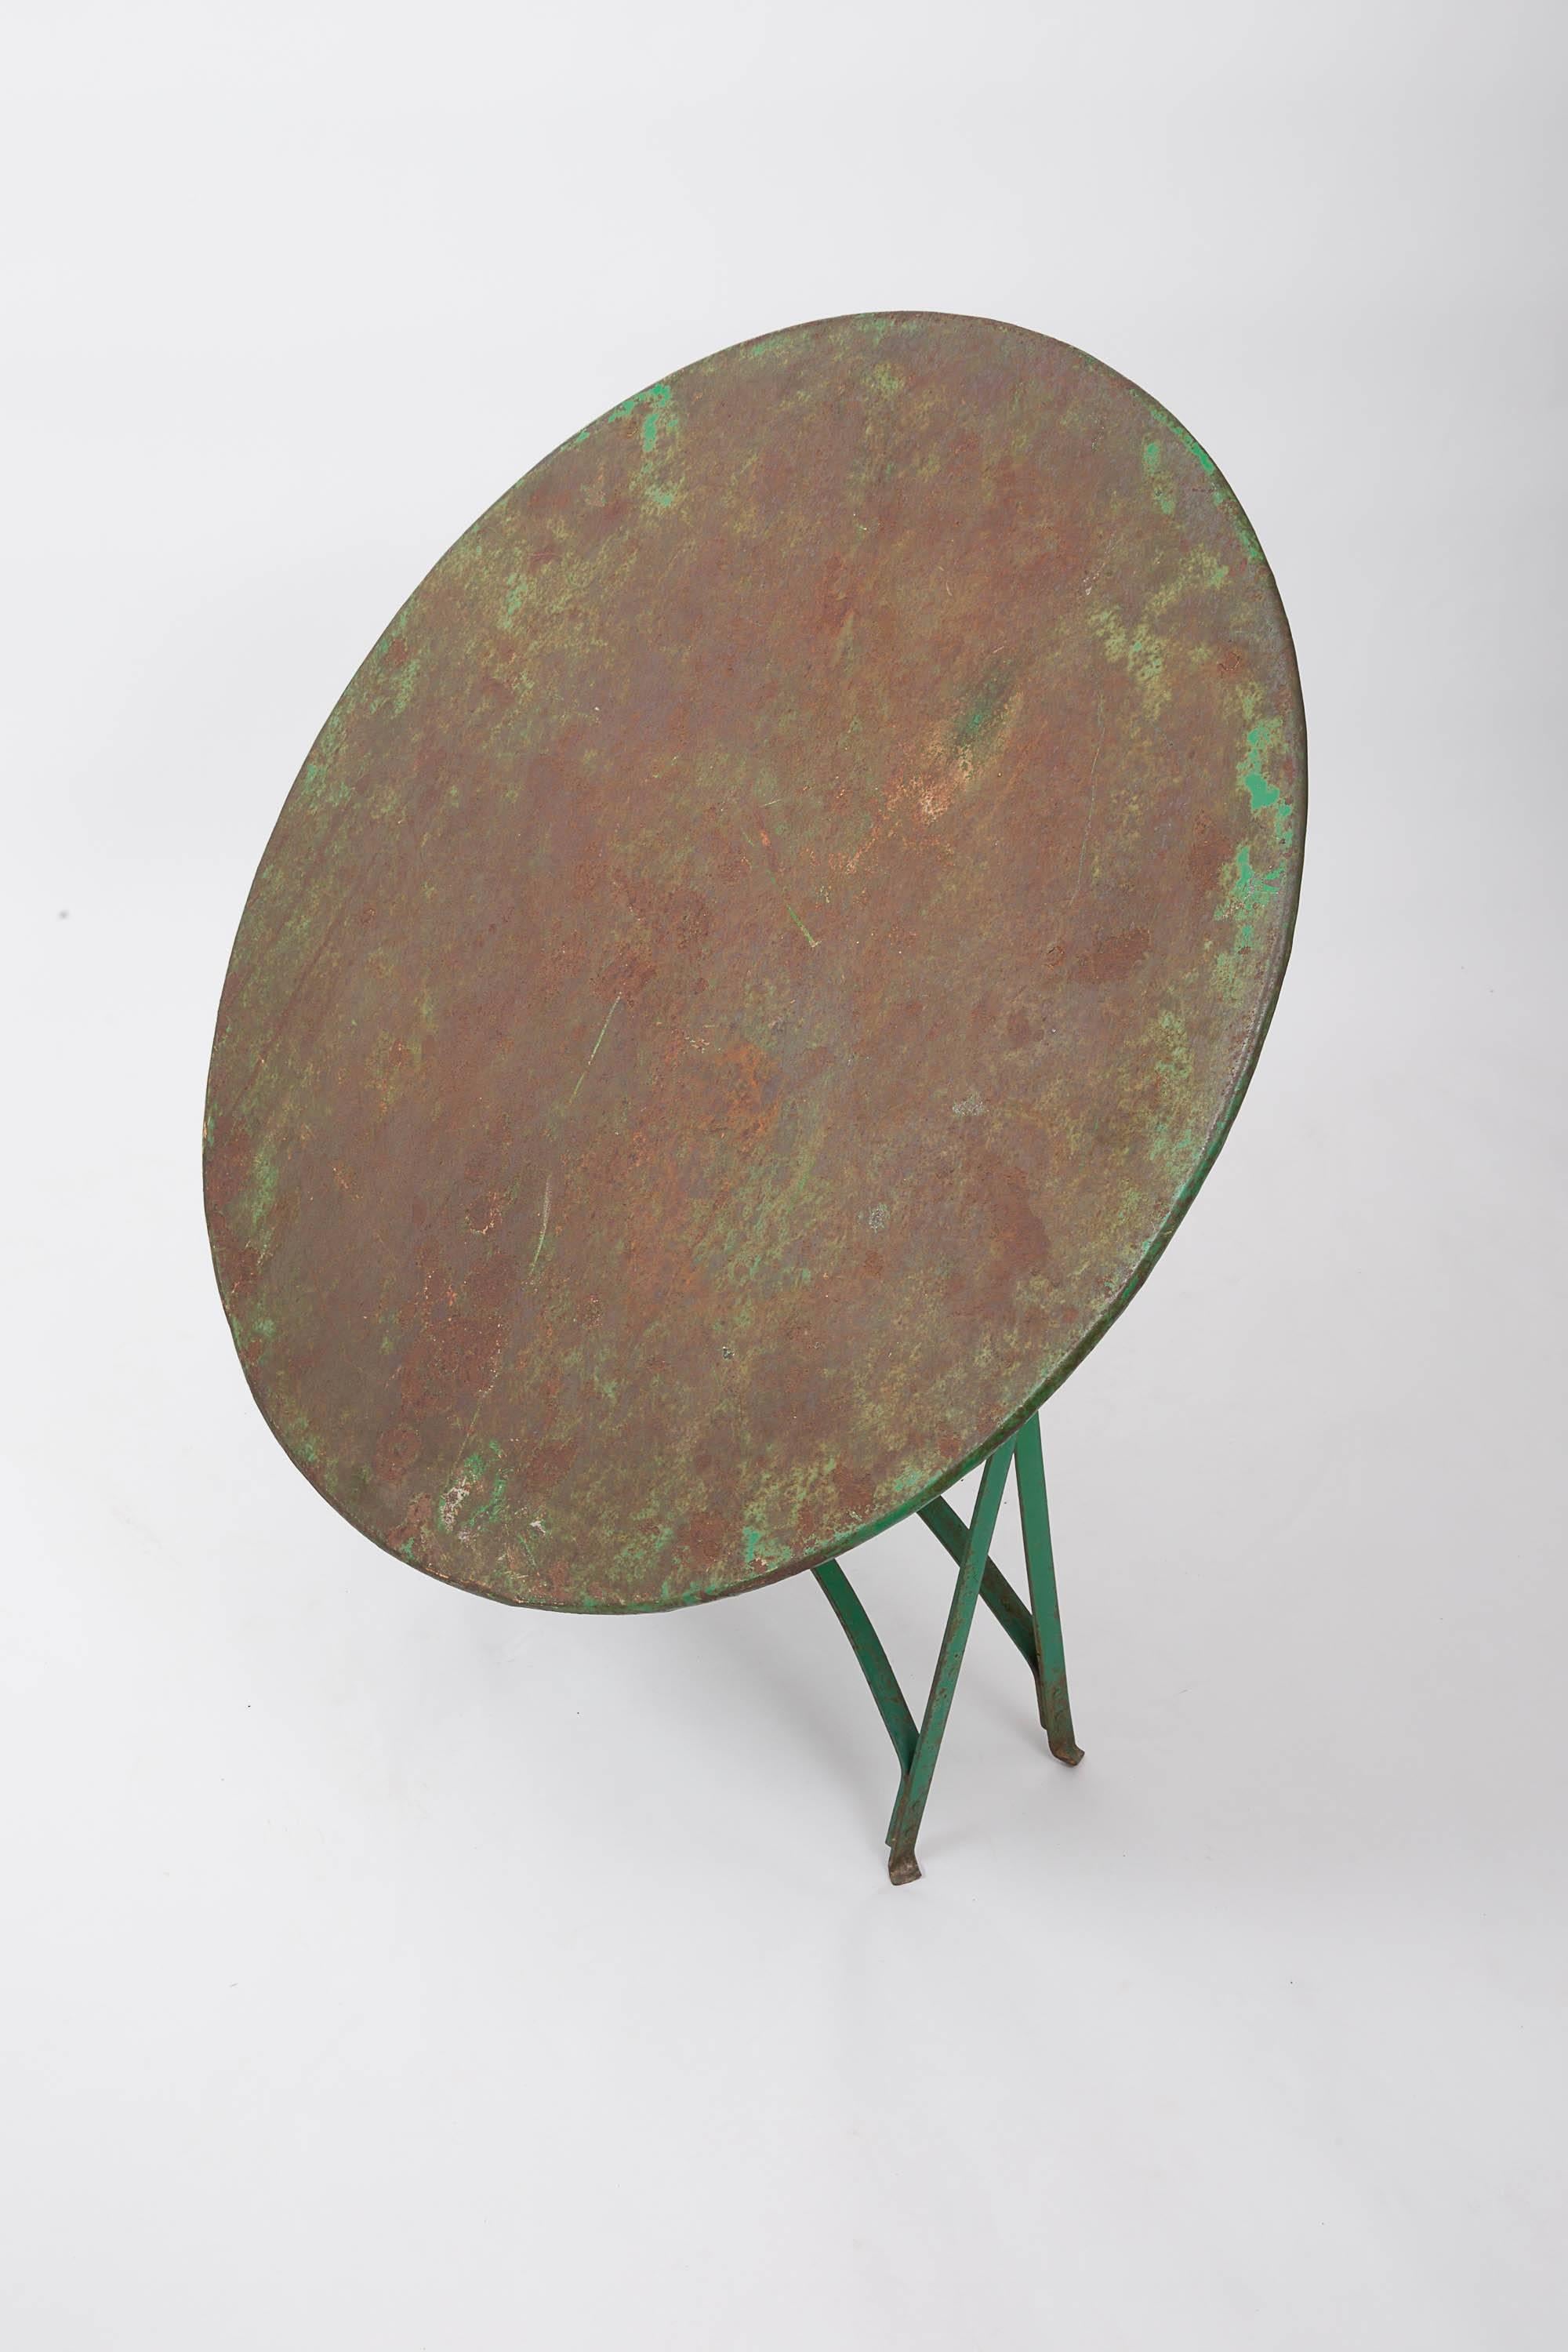 French Turn-of the-Century Metal Garden Table, France, circa 1900